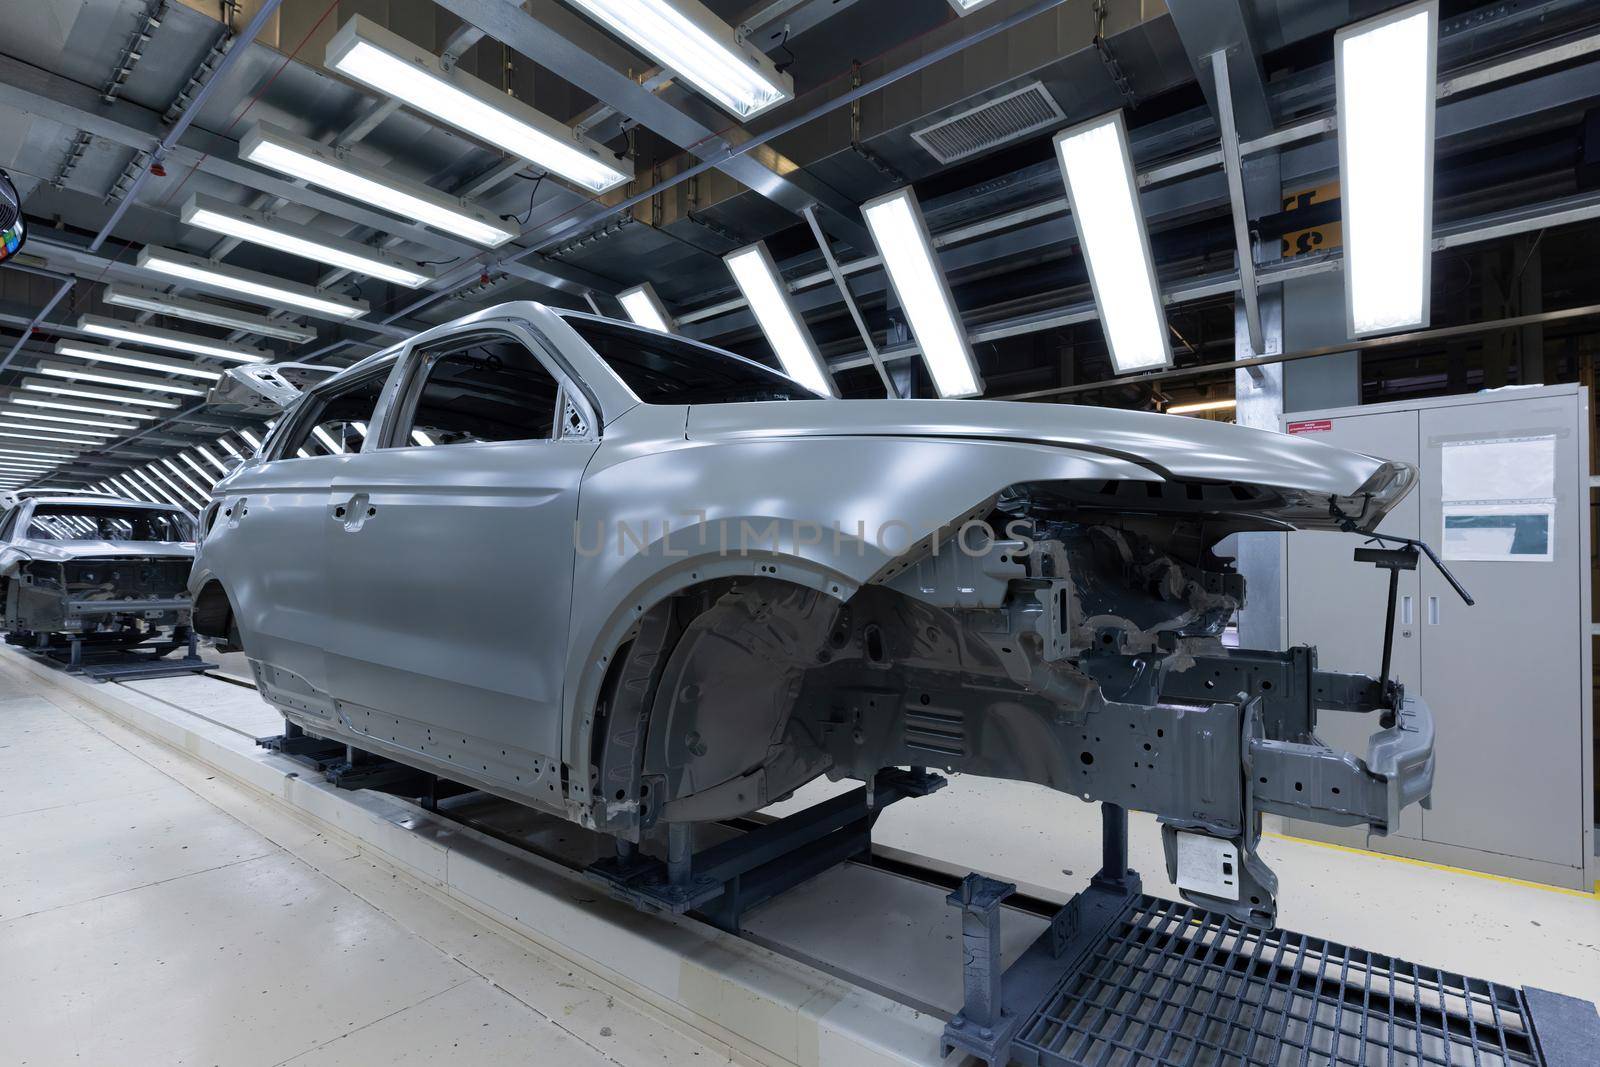 Car bodies are on assembly line. Factory for production of cars. Modern automotive industry. A car being checked before being painted in a high-tech enterprise.